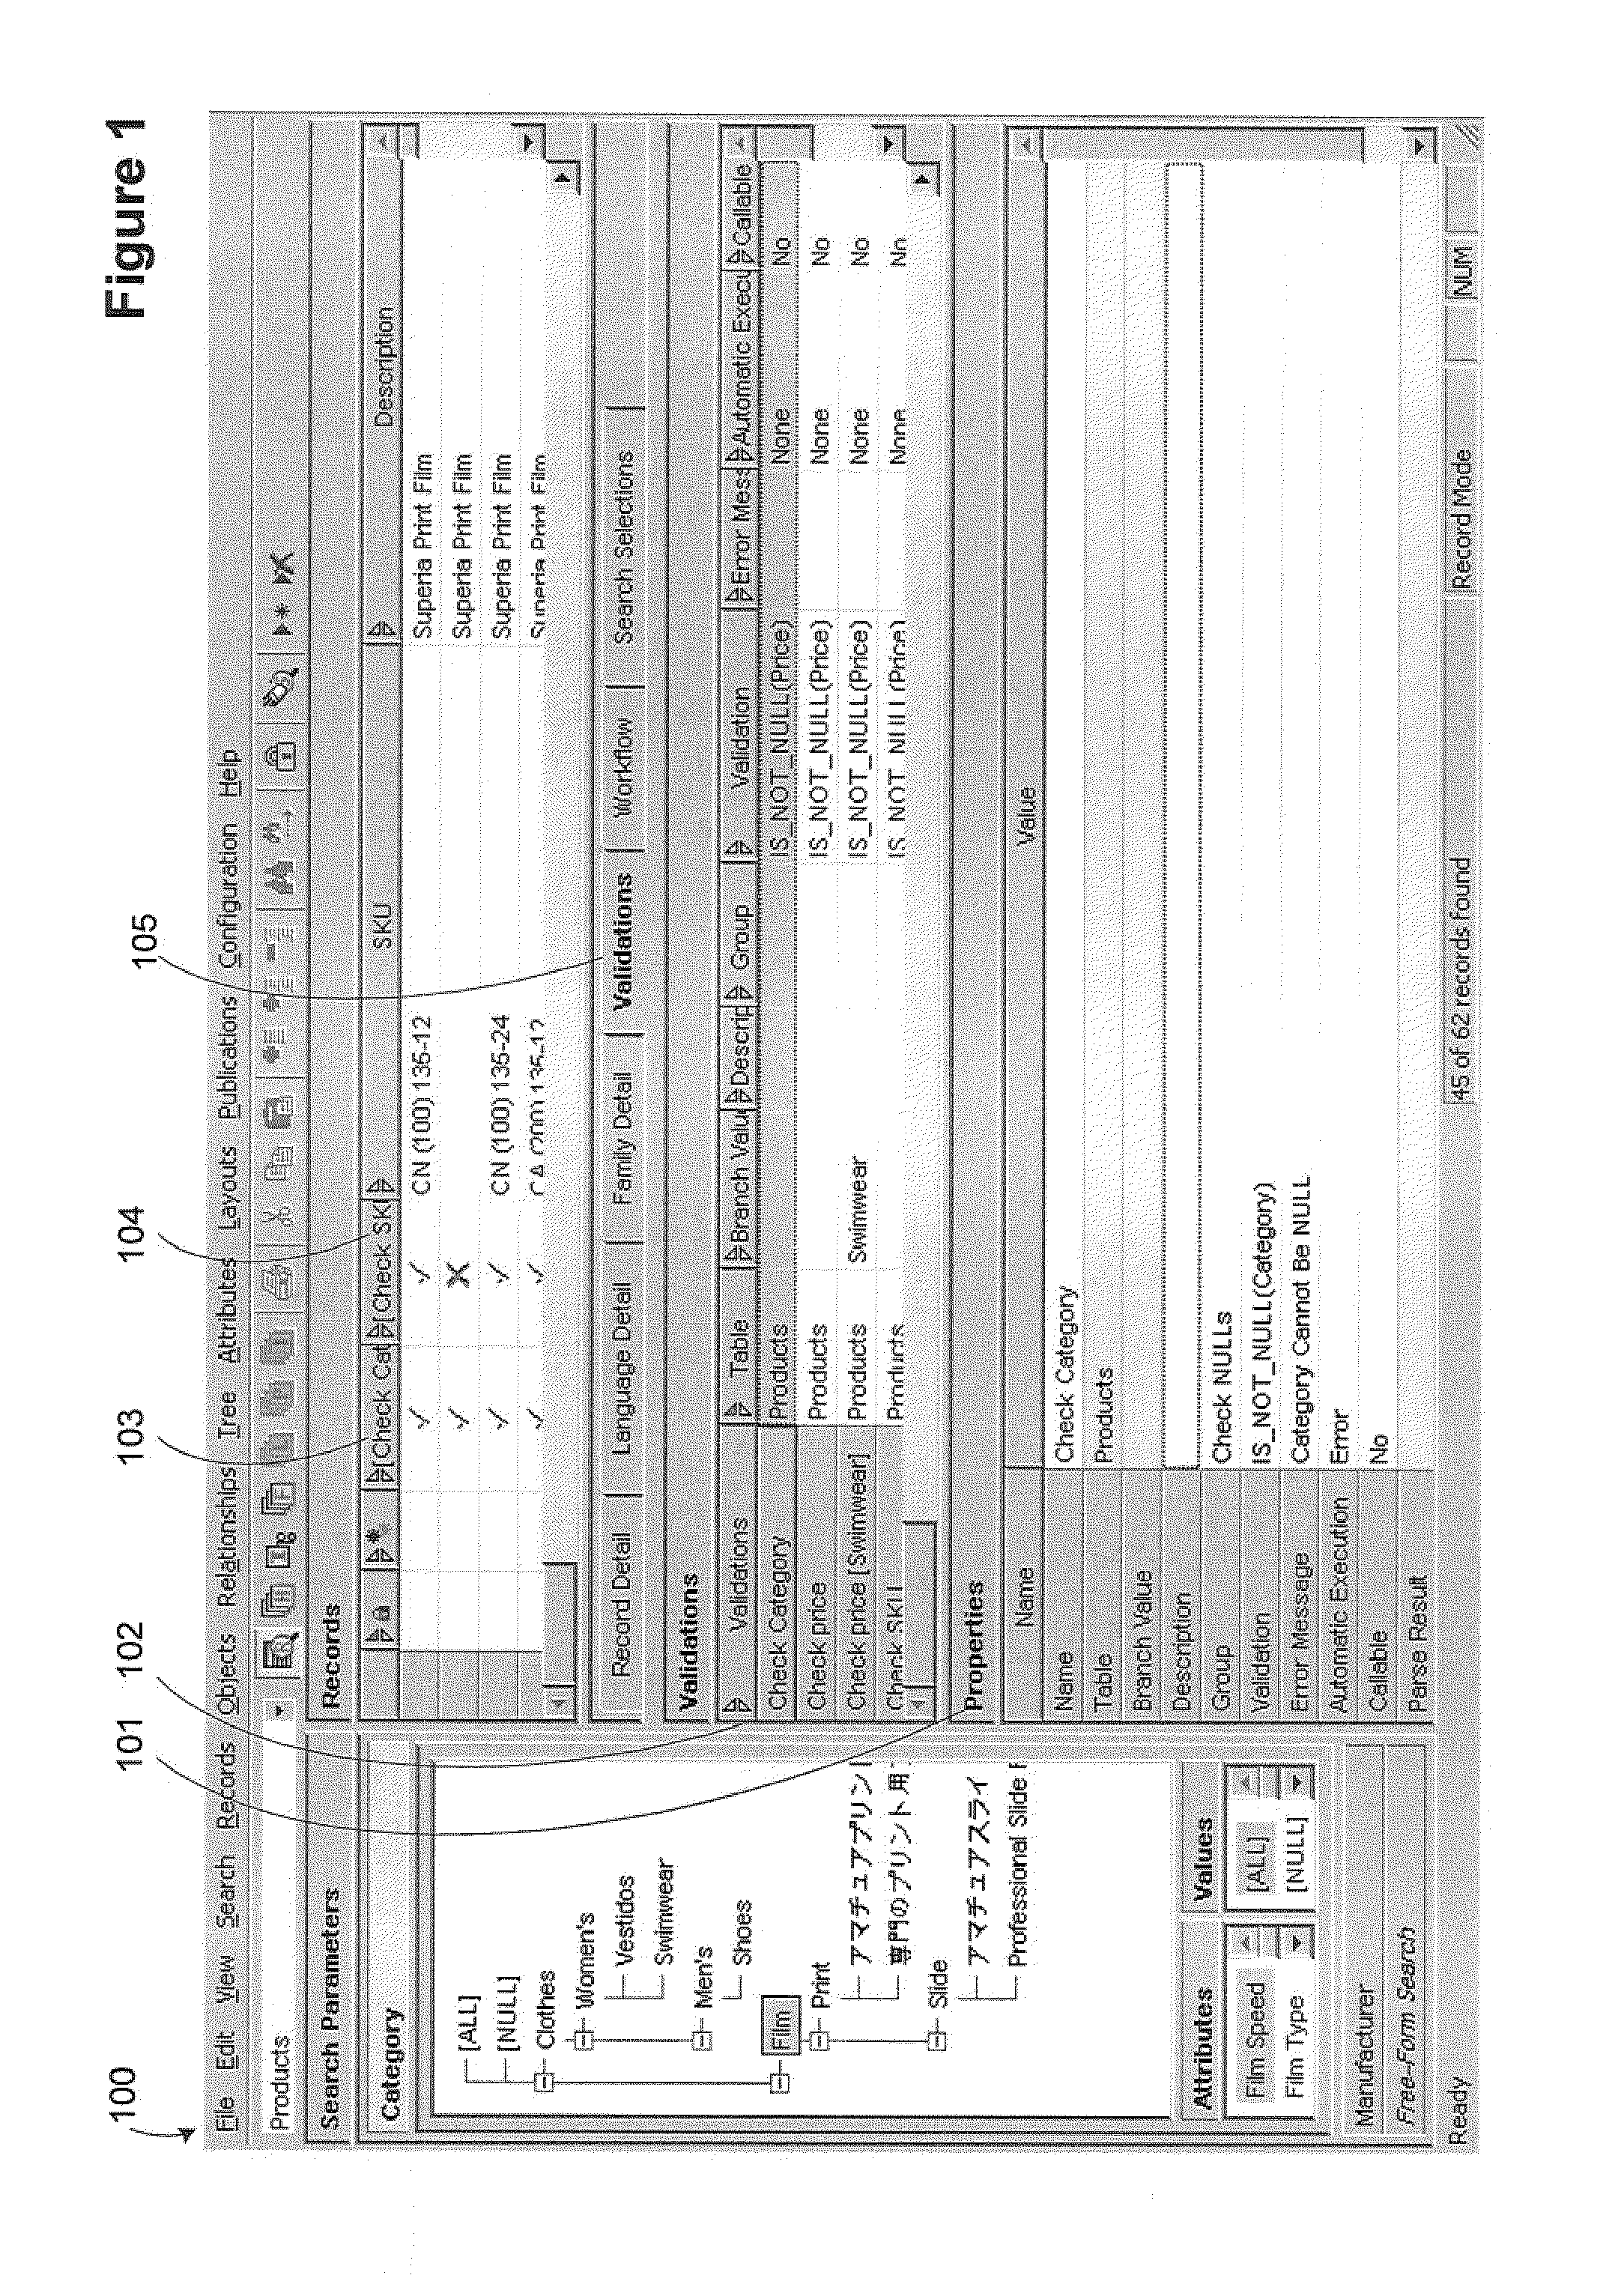 Method for performing expression-based validation